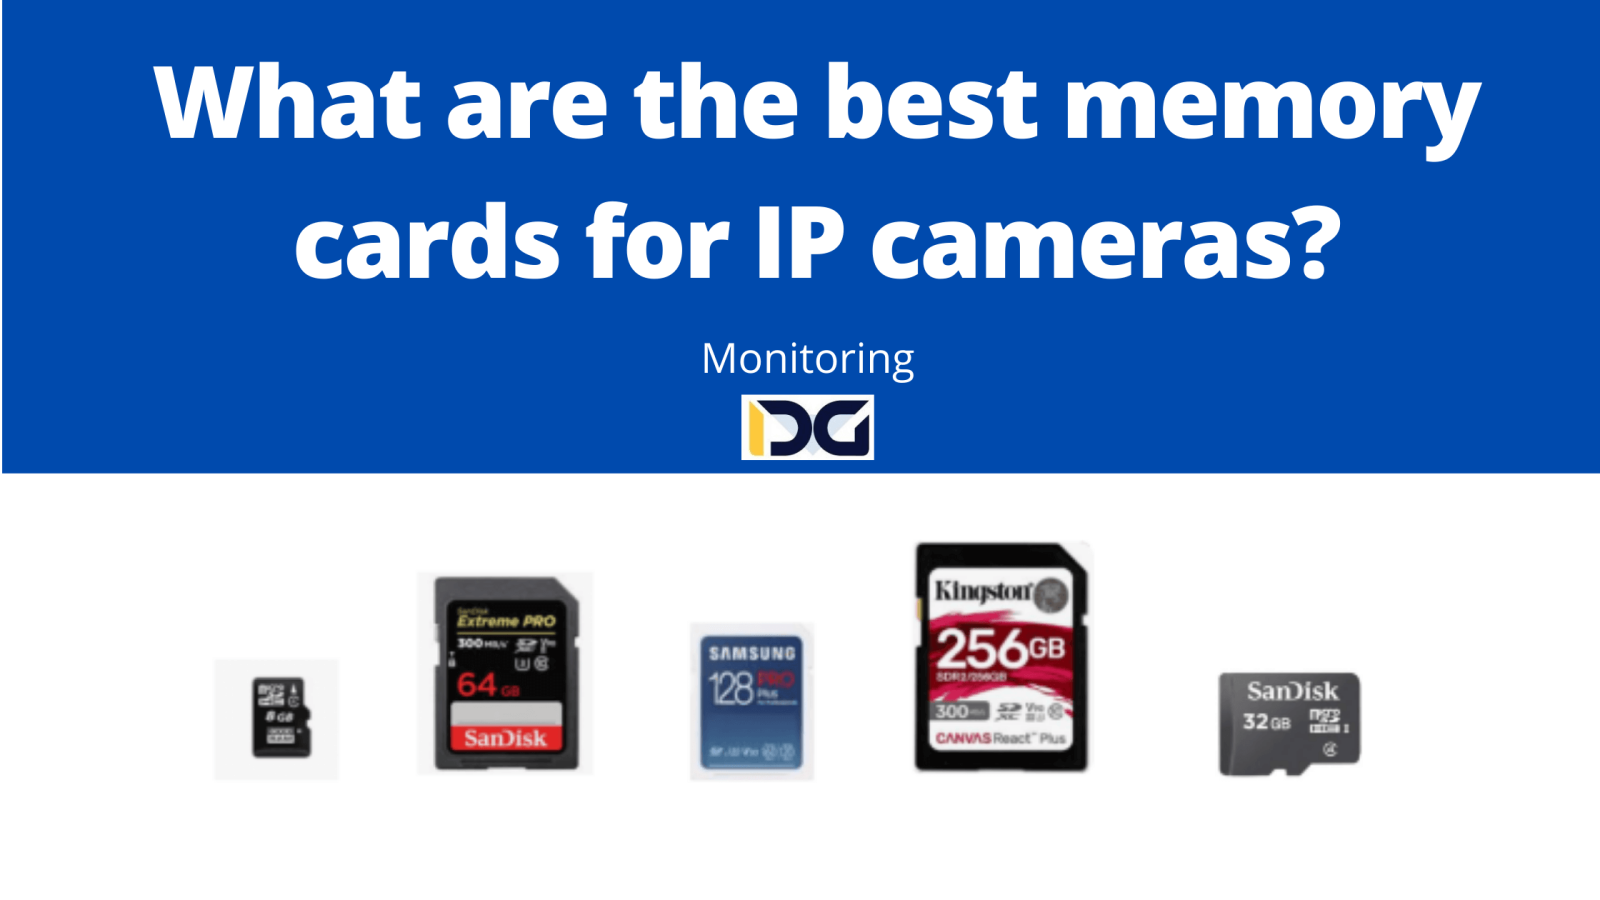 What are the best memory cards for IP cameras?